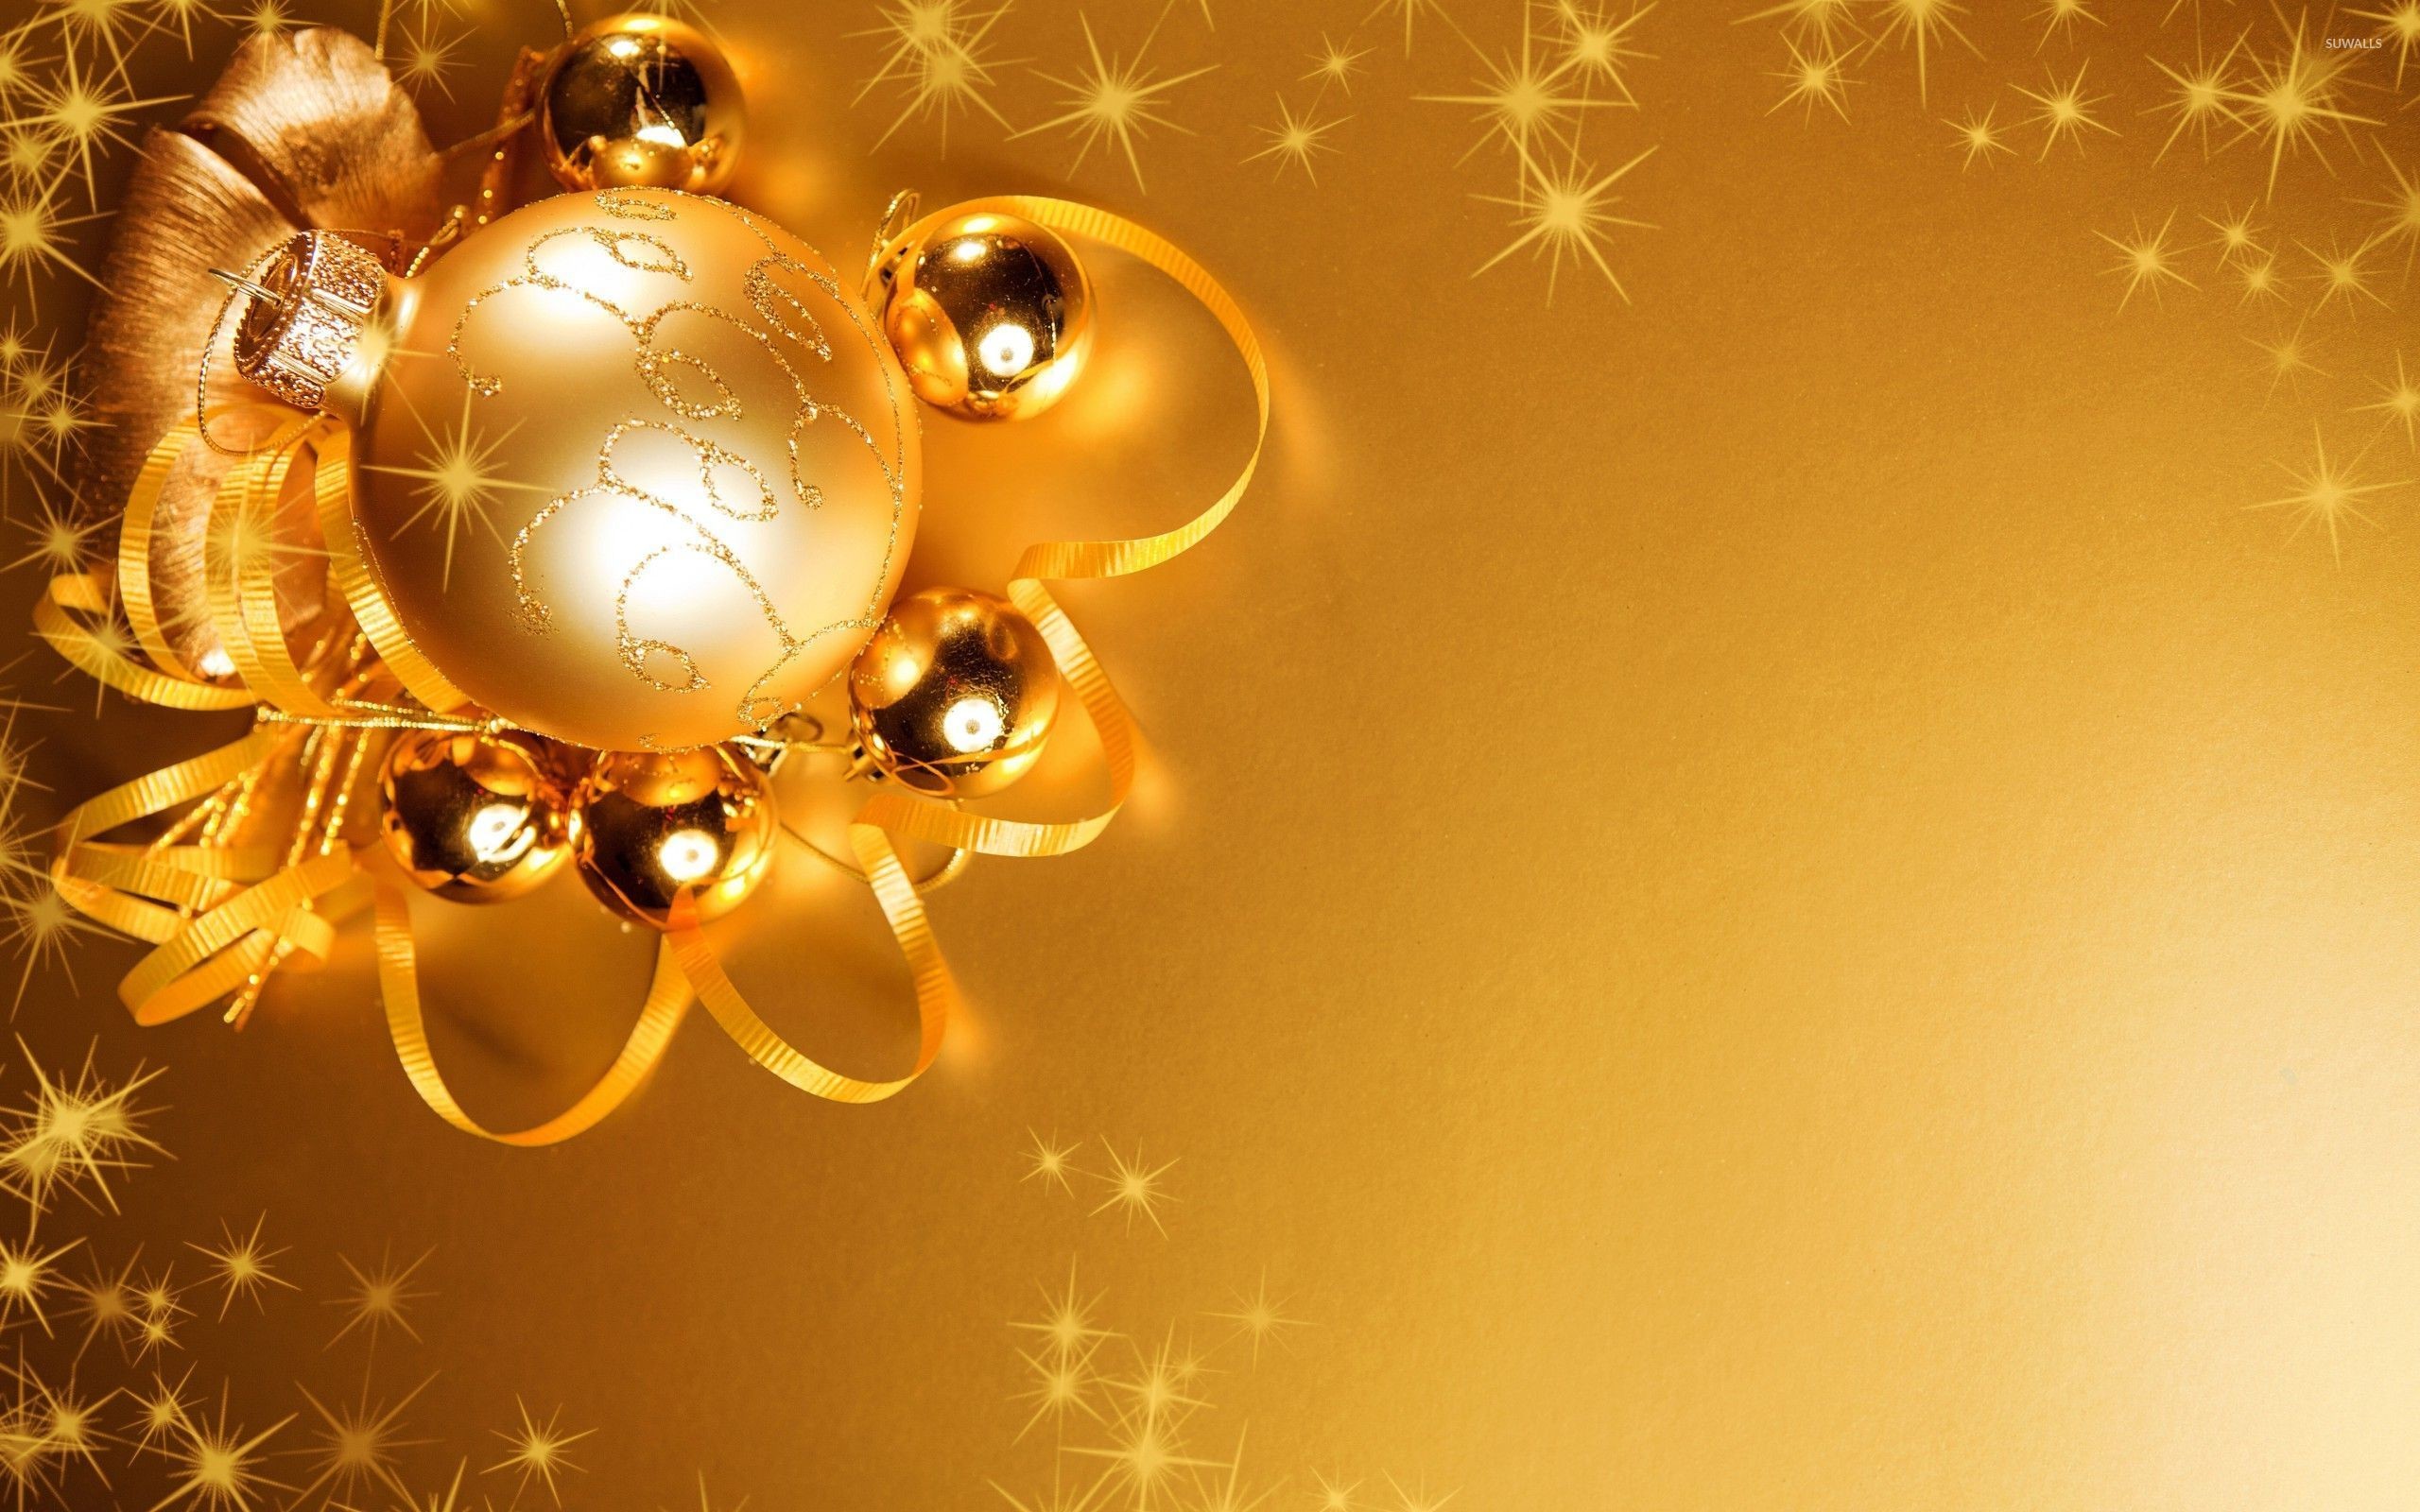 Lights reflecting in the golden Christmas decorations wallpaper  jpg